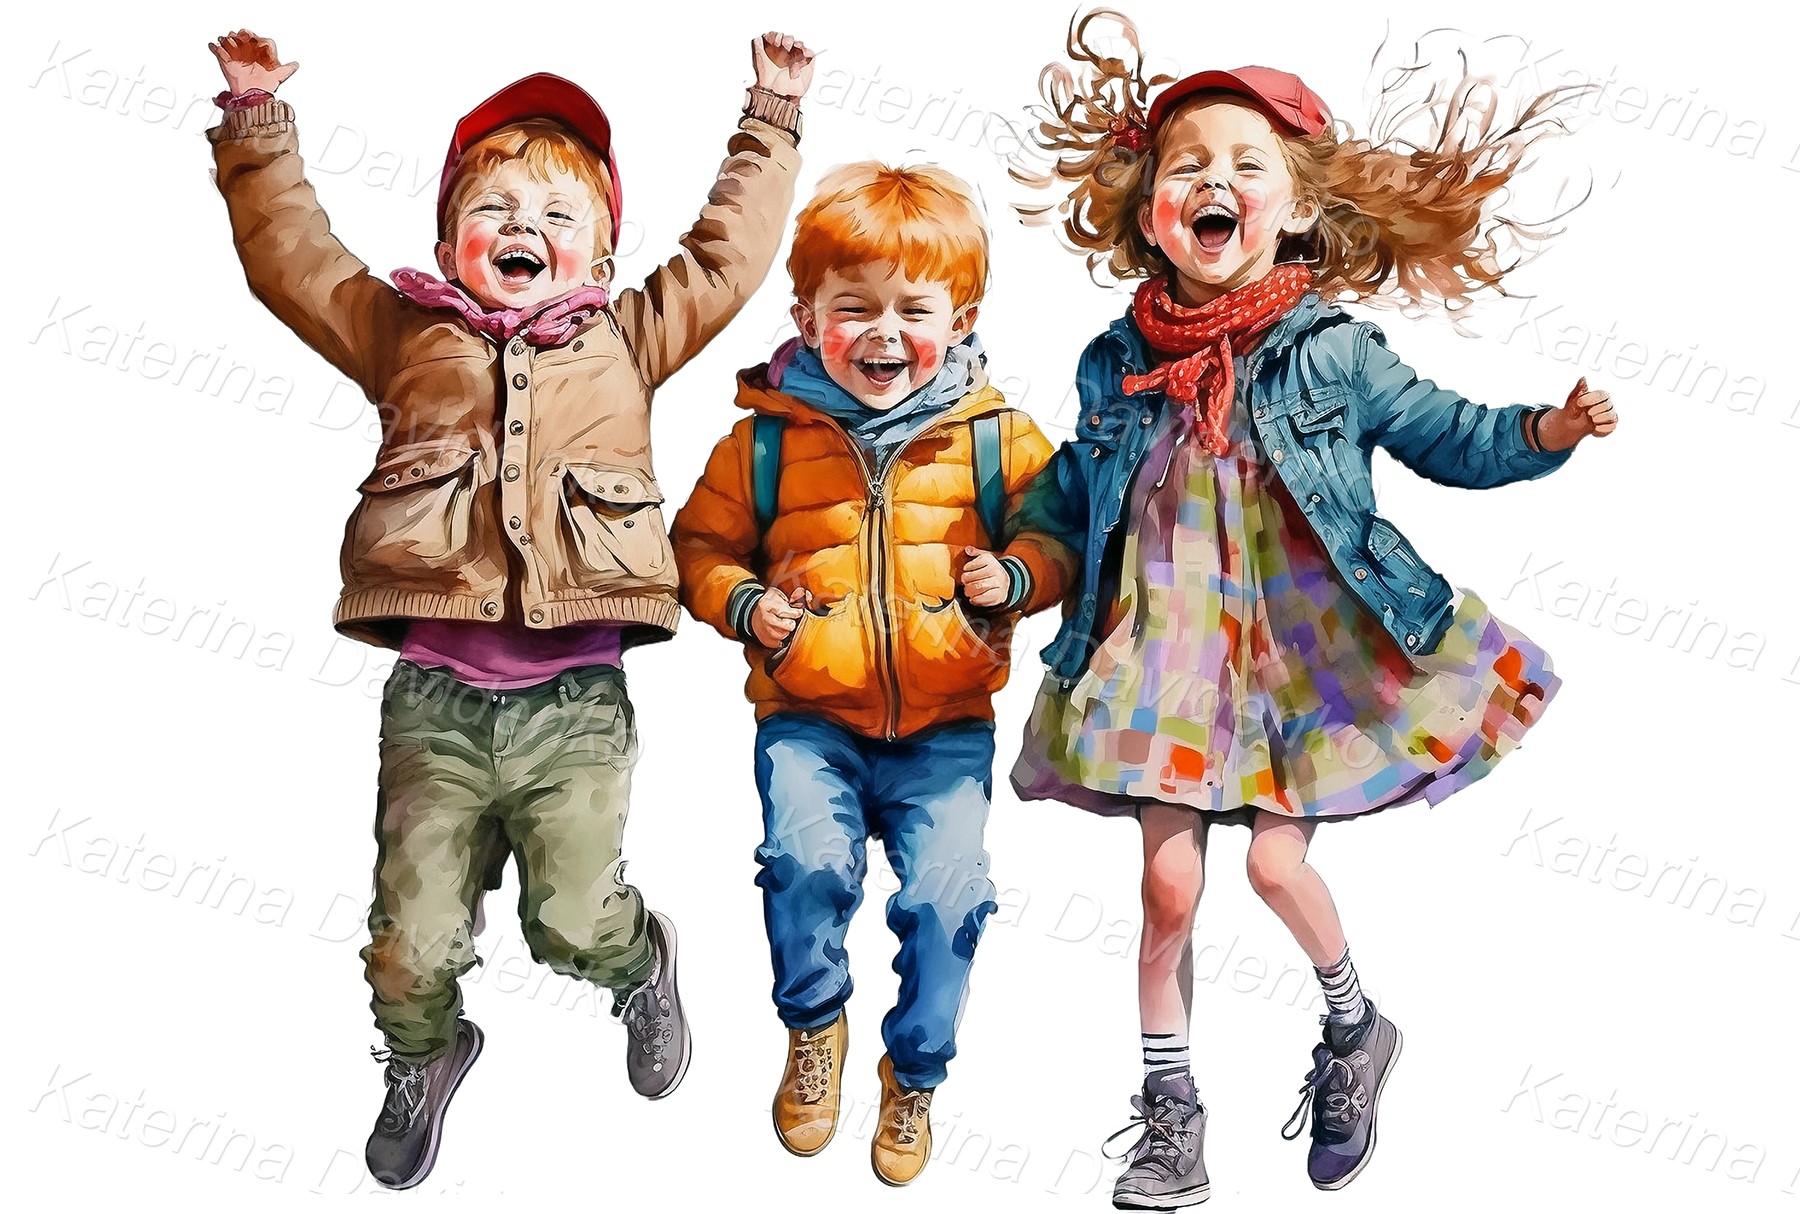 Three happy kids jumping together, joyful laughing children, watercolor illustration